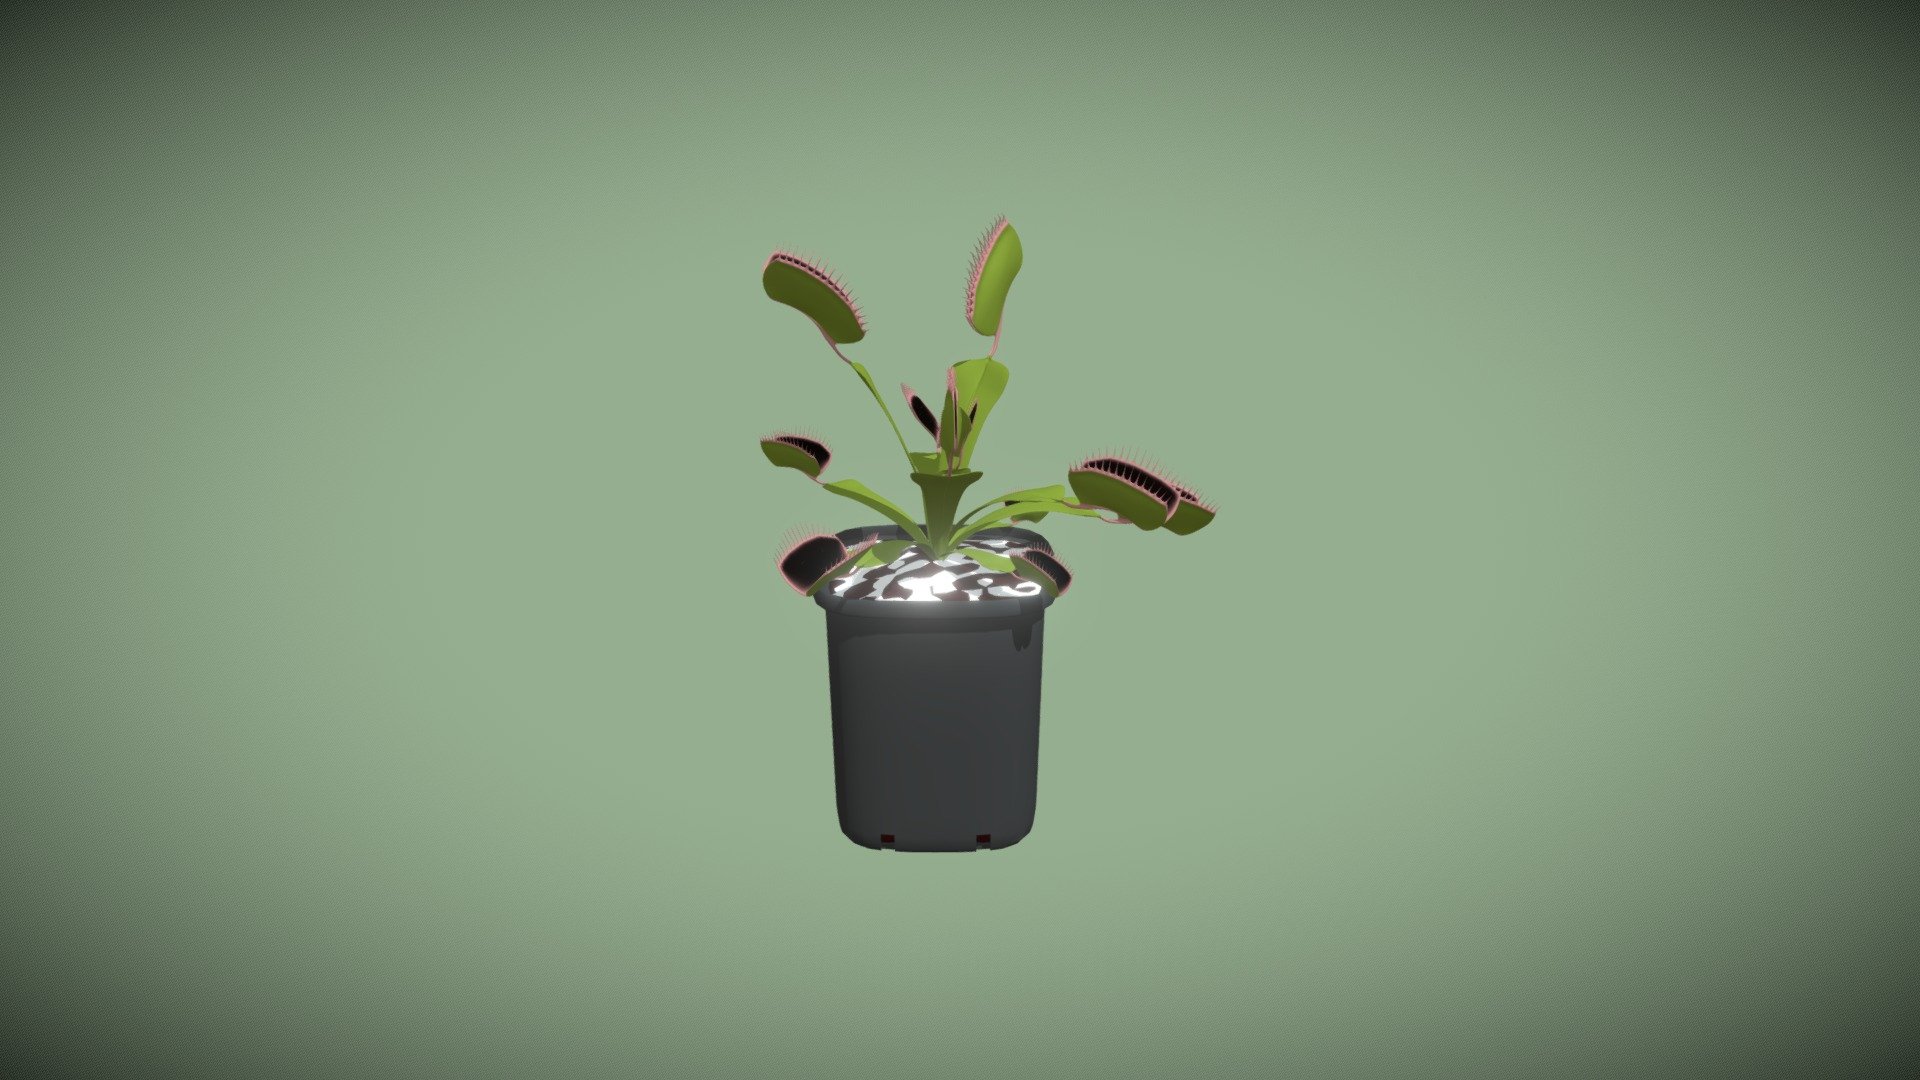 3D model of a Dionaea muscipula, a carnivorous plant also known as Venus flytrap.

Created in Blender and procedurally textured. Please see detailed renders here: https://fertuffo.artstation.com/store/kwRz/3d-venus-flytrap
All objects are named and presented as separate parts; materials are easy to be modified, removed, or replaced.
Carefully shaped with accurate proportions. 
Several exchange formats including .blend, .OBJ, .fbx, .DAE, .stl - Venus flytrap (Dionaea muscipula) - Buy Royalty Free 3D model by Blenduffo 3d model